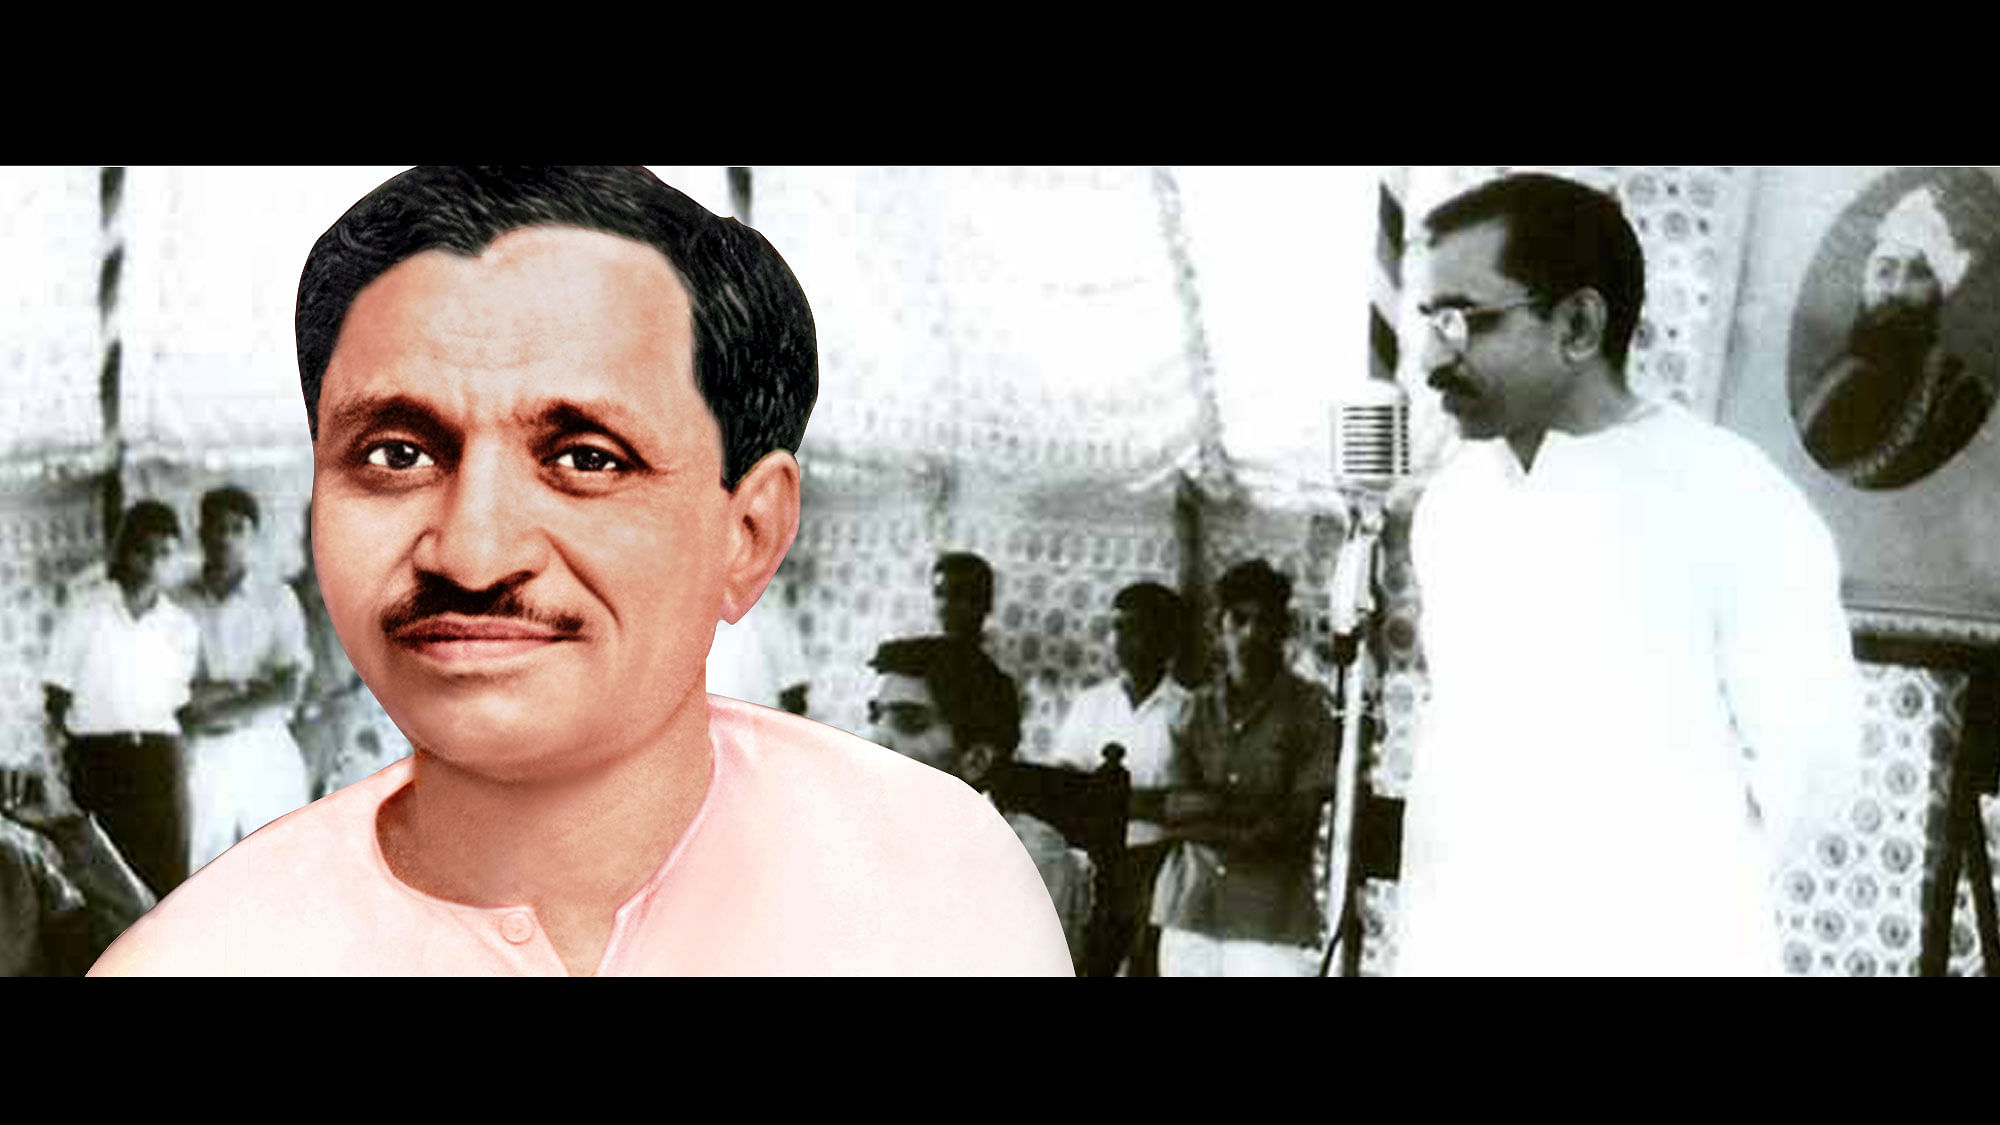 Deendayal Upadhyay was a leader who understood the common man’s needs. 